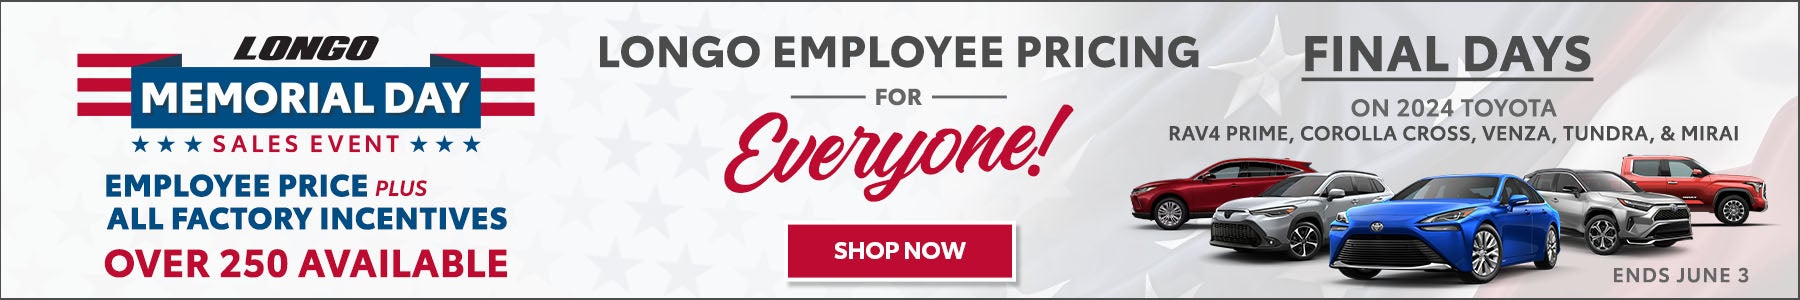 Employee Pricing for Everyone!